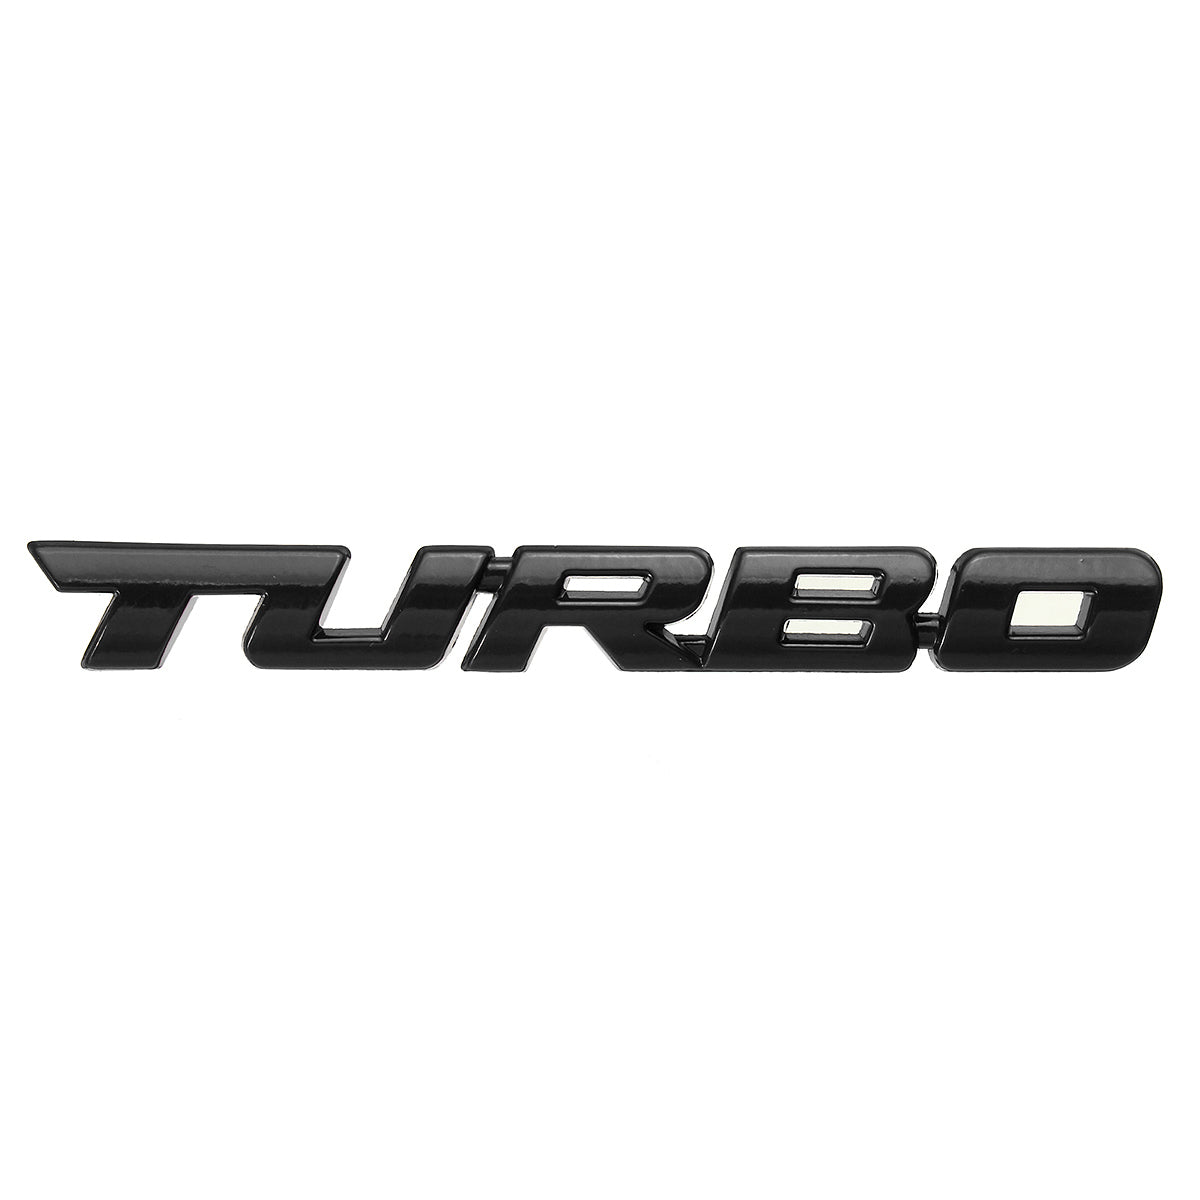 Black Turbo 3D Metal Car Decals Lettering Badge Sticker for Auto Body Rear Tailgate